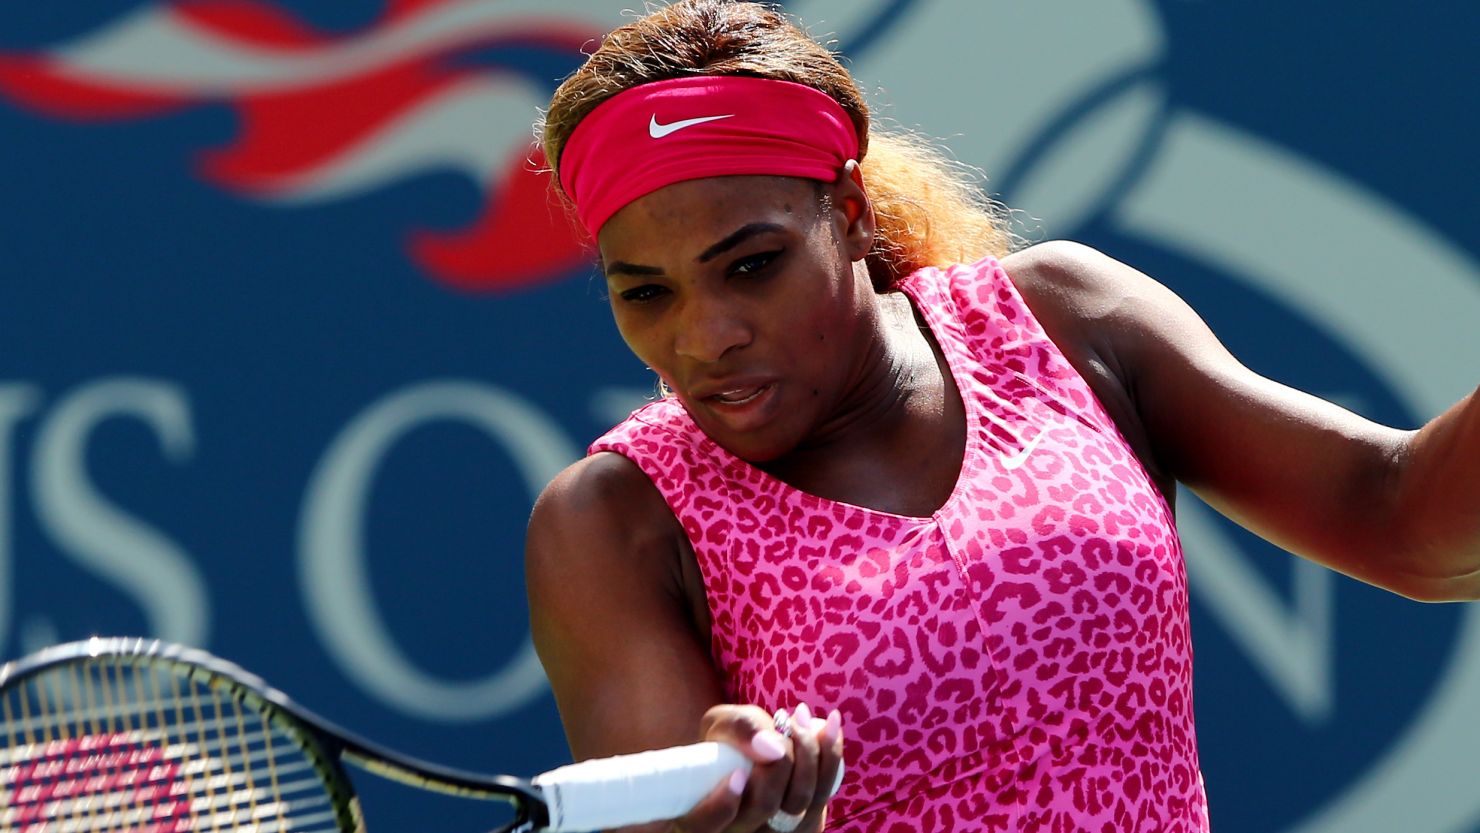 Serena Williams only lost one game at the U.S. Open on Thursday against Vania King. 